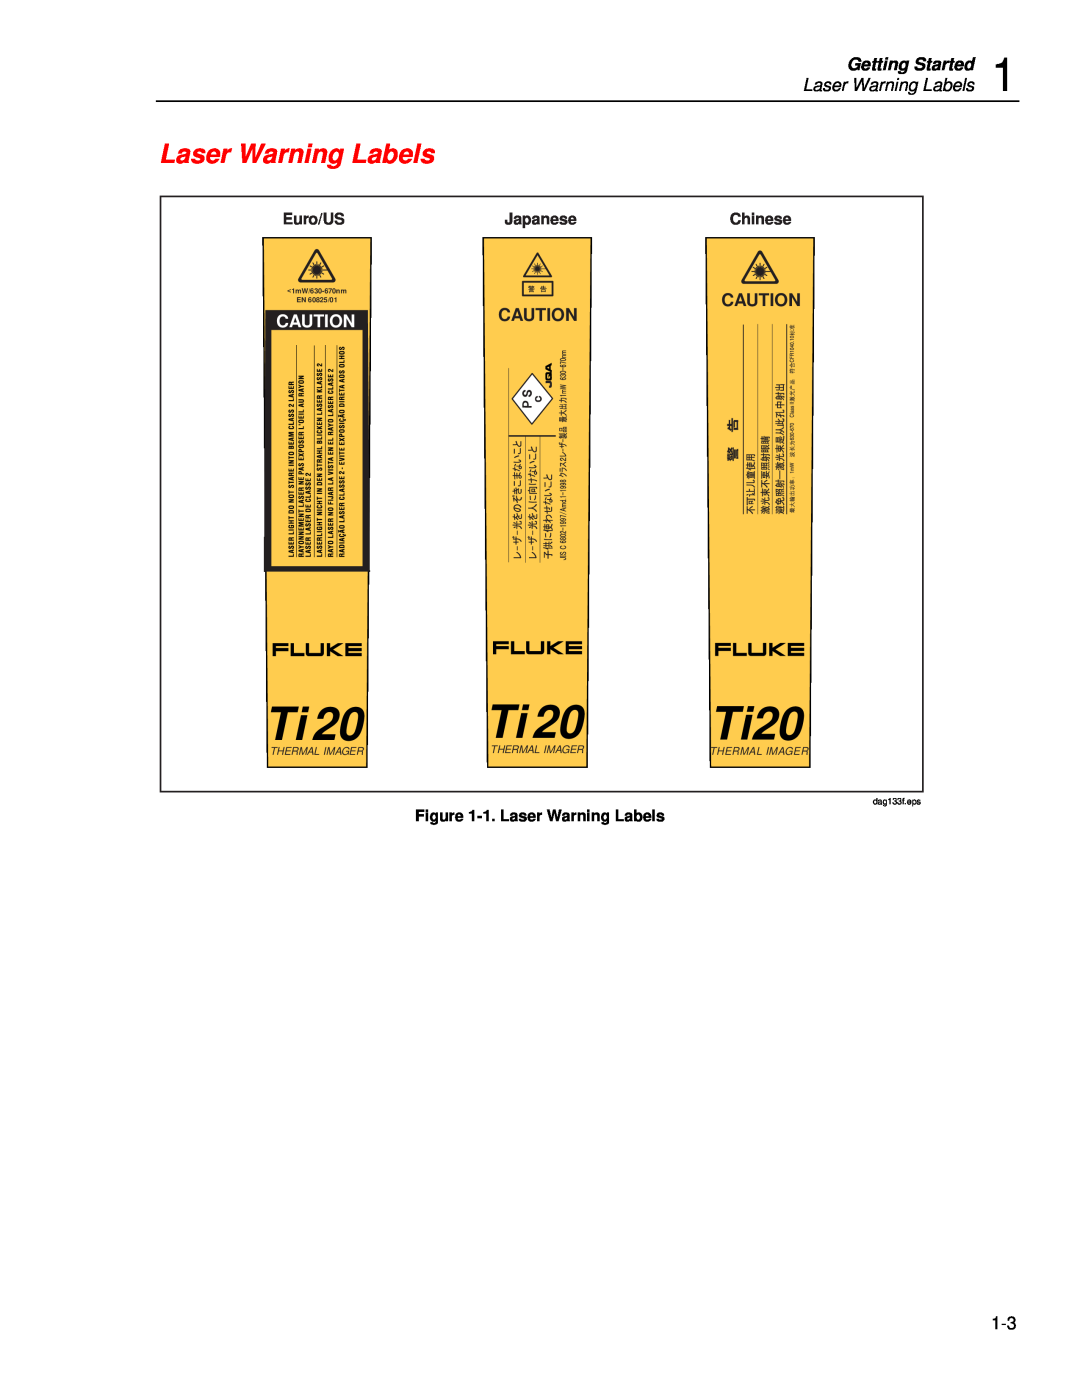 Fluke Ti20 Laser Warning Labels, Getting Started, Cautioncaution, Euro/US, Japanese, Chinese, Thermal Imager, dag133f.eps 